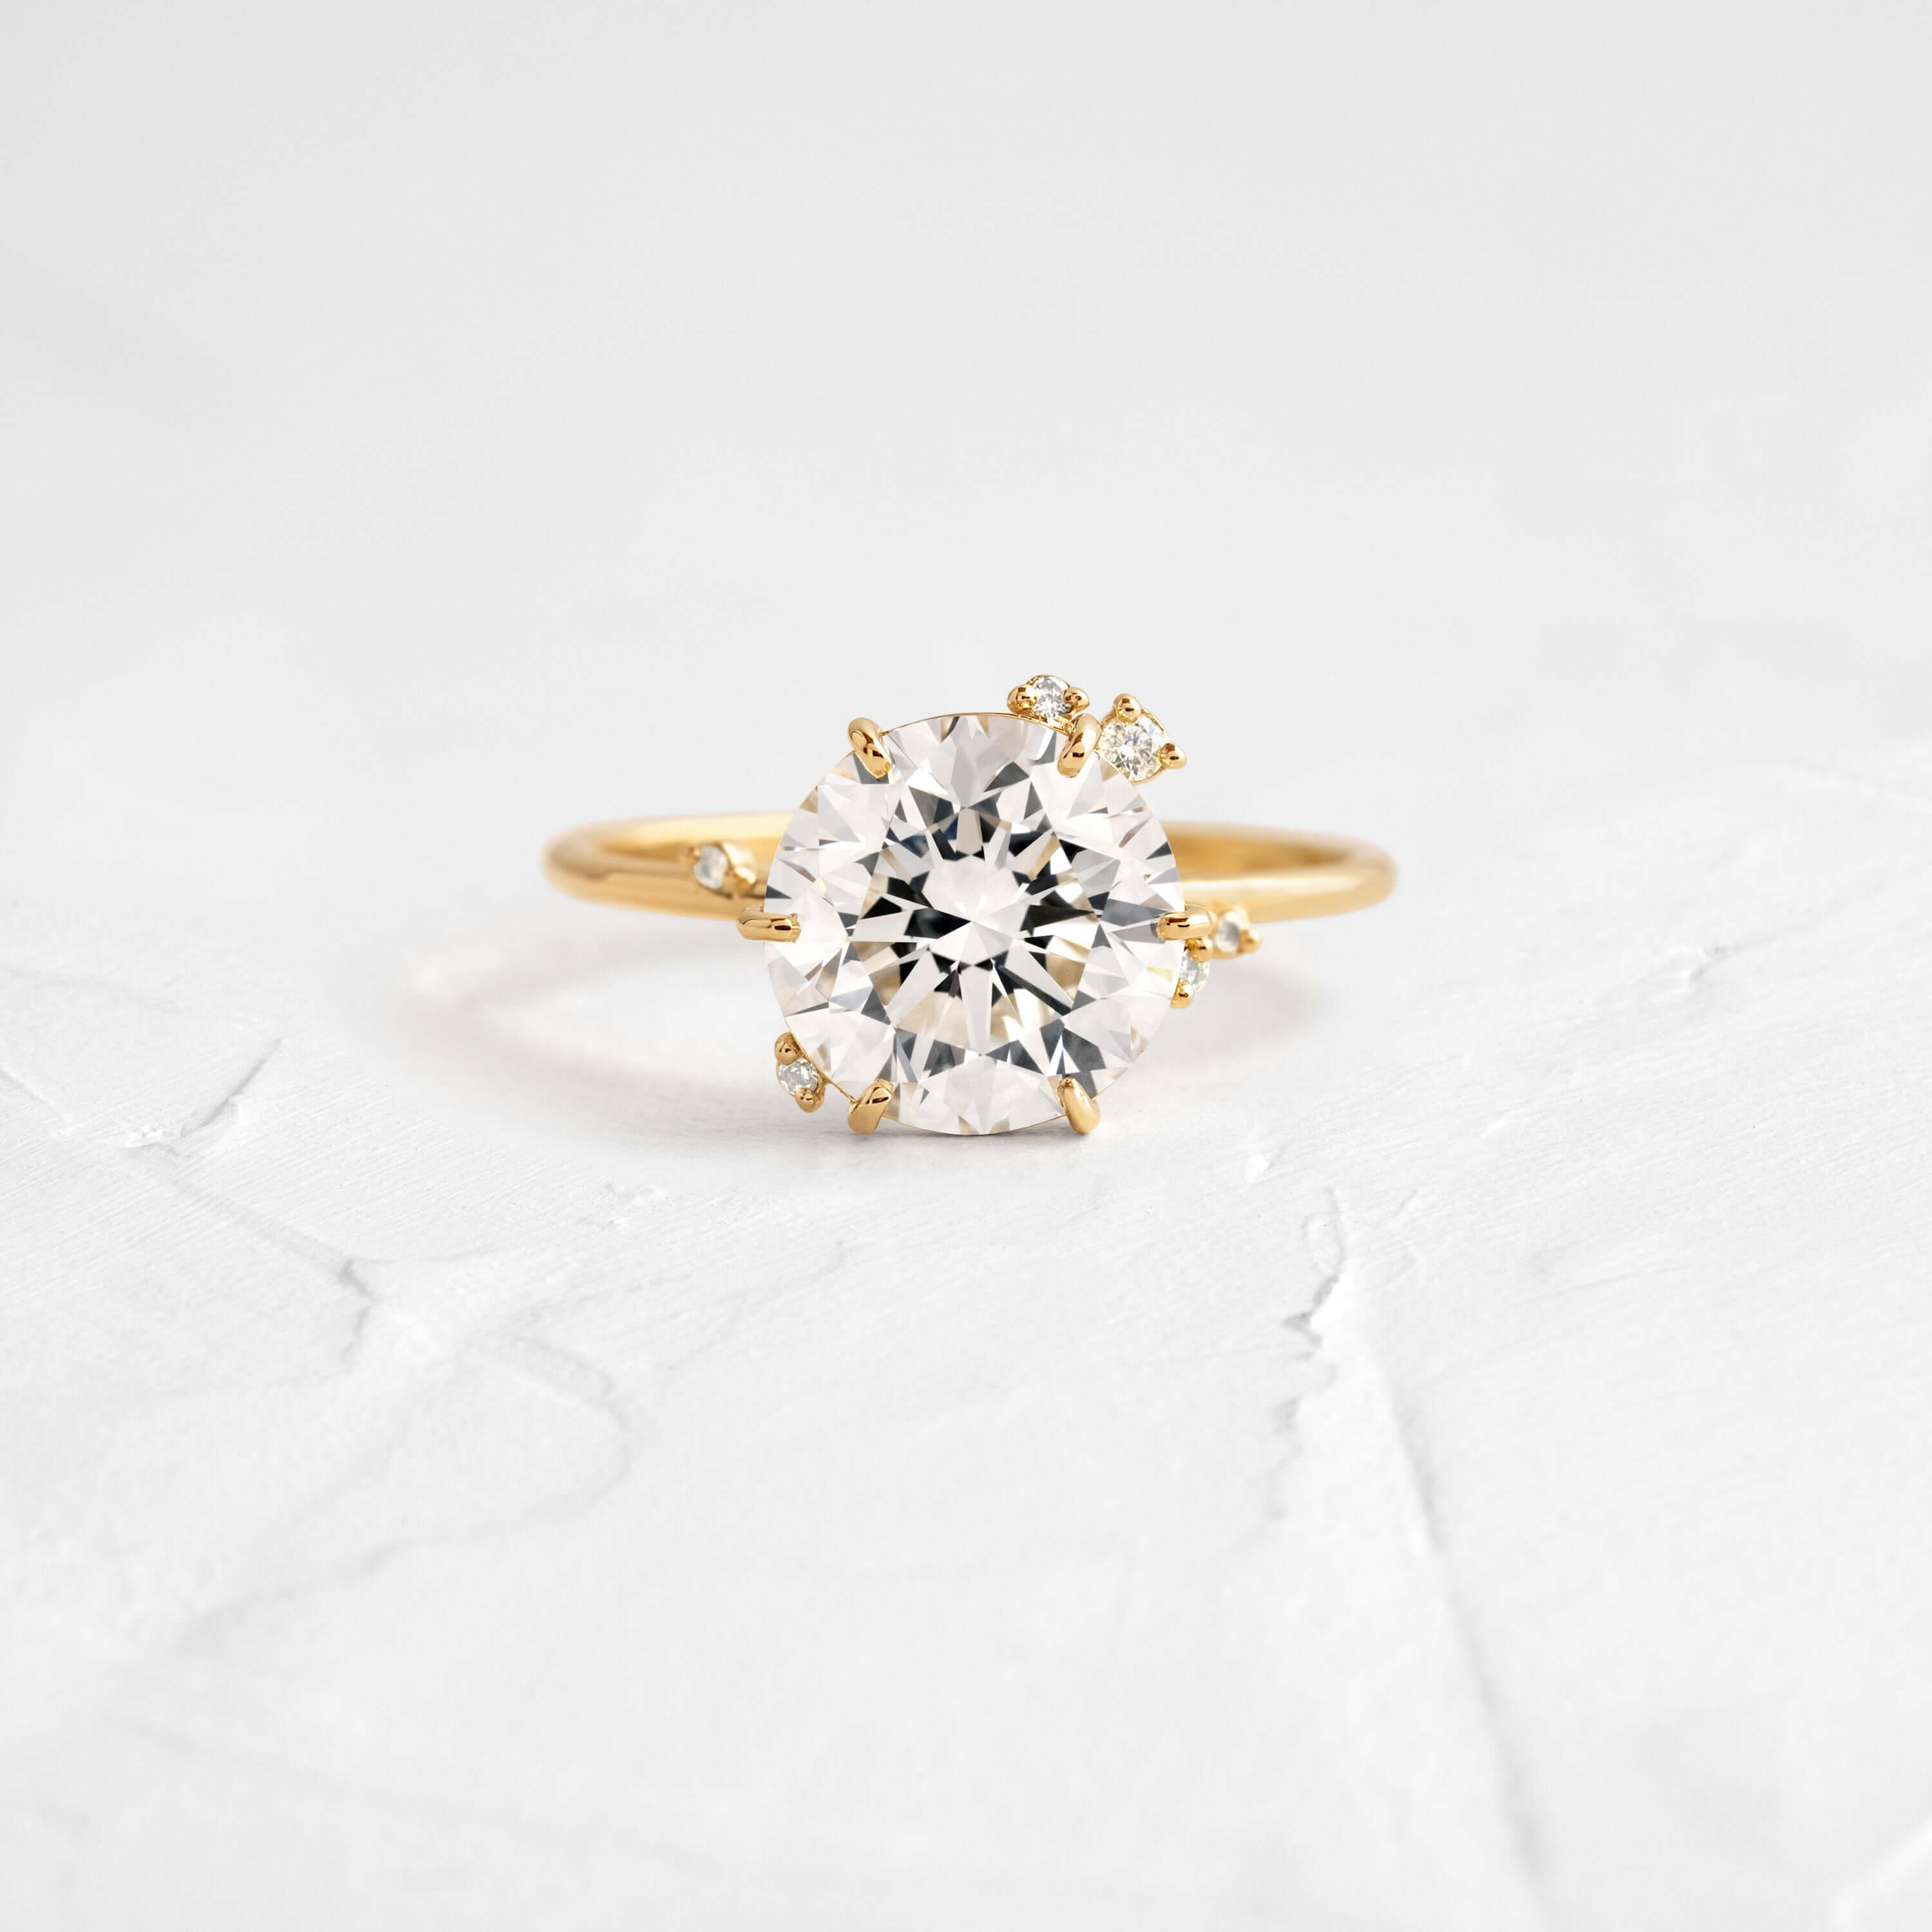 To A Flame Ring, Round | Melanie Casey Fine Jewelry